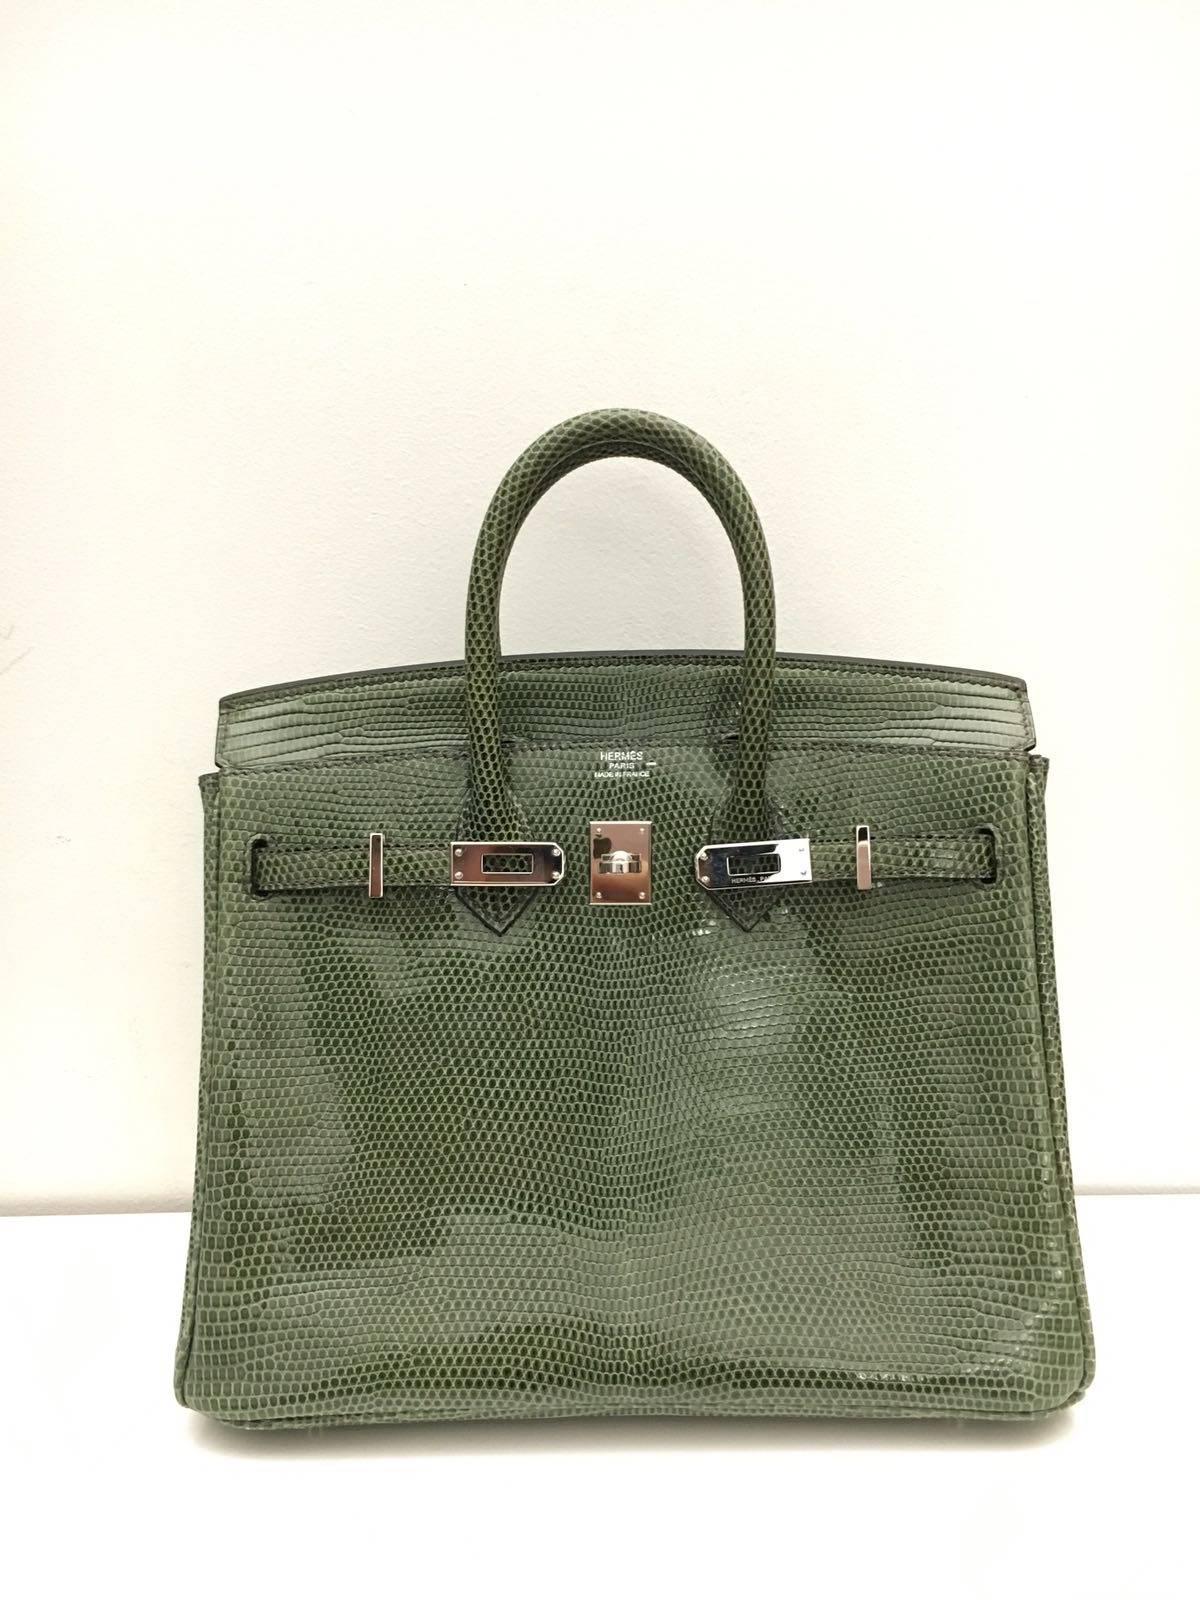 Hermes 
Birkin Size 25
Lizard Leather 
Colour Verte Olive 
Silver Hardware
Store fresh, comes with receipt and full set (dust bag, box...) 
Hydeparkfashion specializes in sourcing and delivering authentic luxury handbags, mainly Hermes, to clients